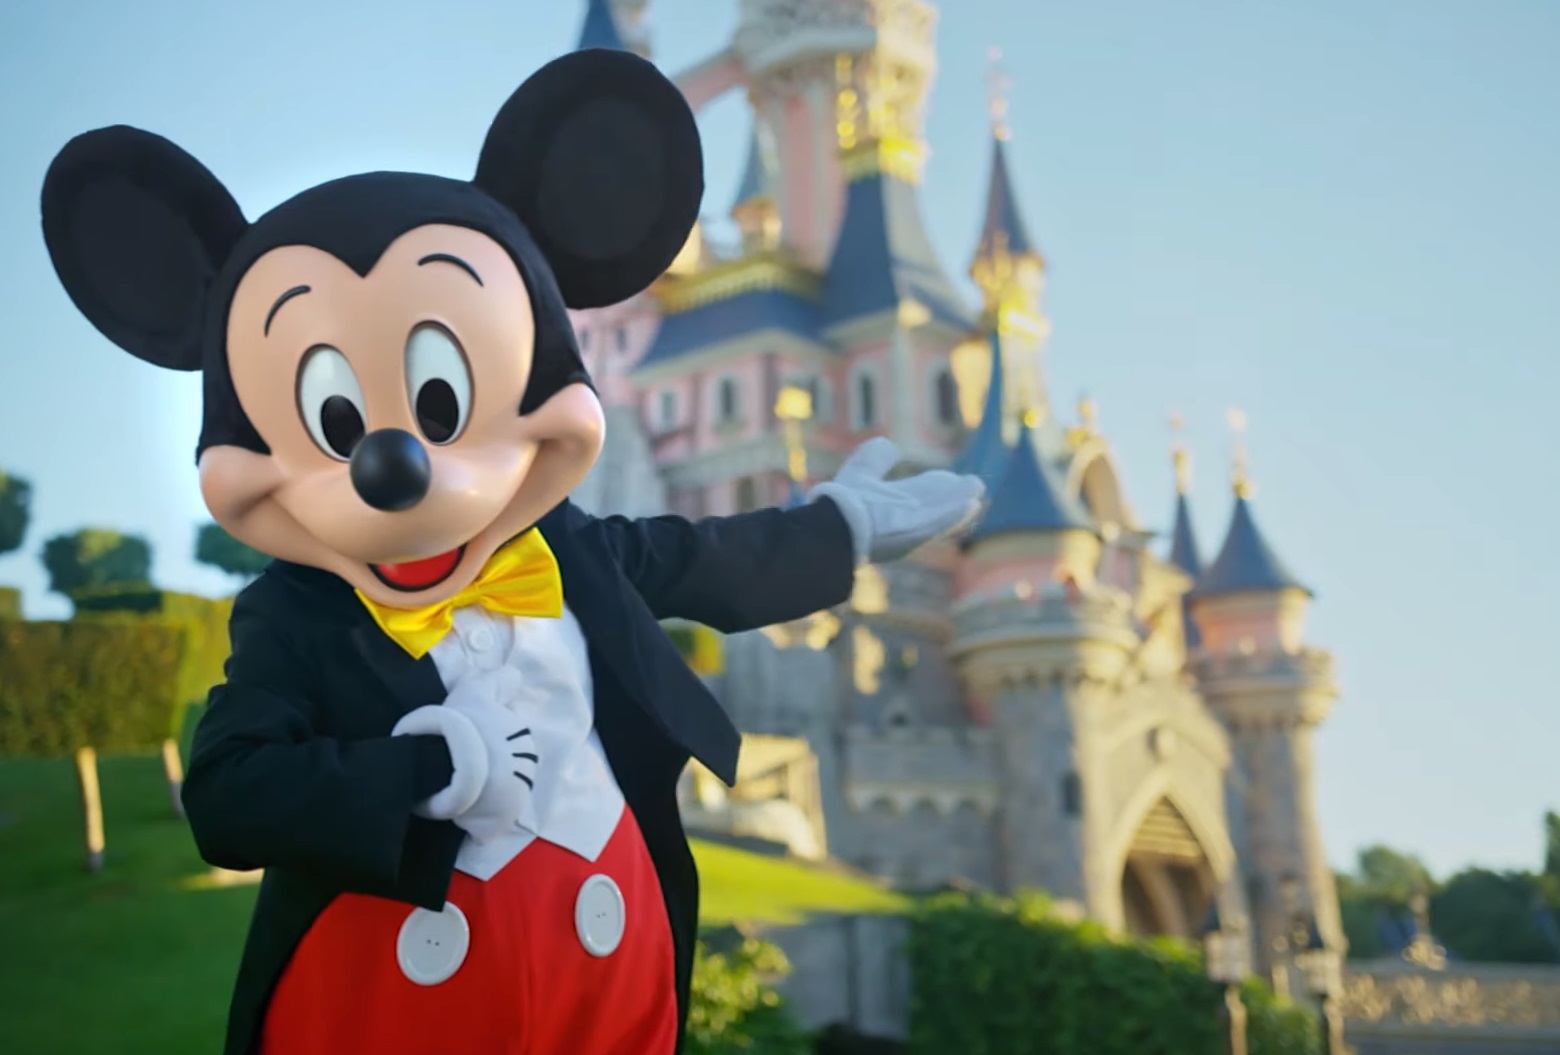 I Bet You Can’t Get 13/18 on This General Knowledge Quiz (feat. Disney) Disneyland Mickey Mouse